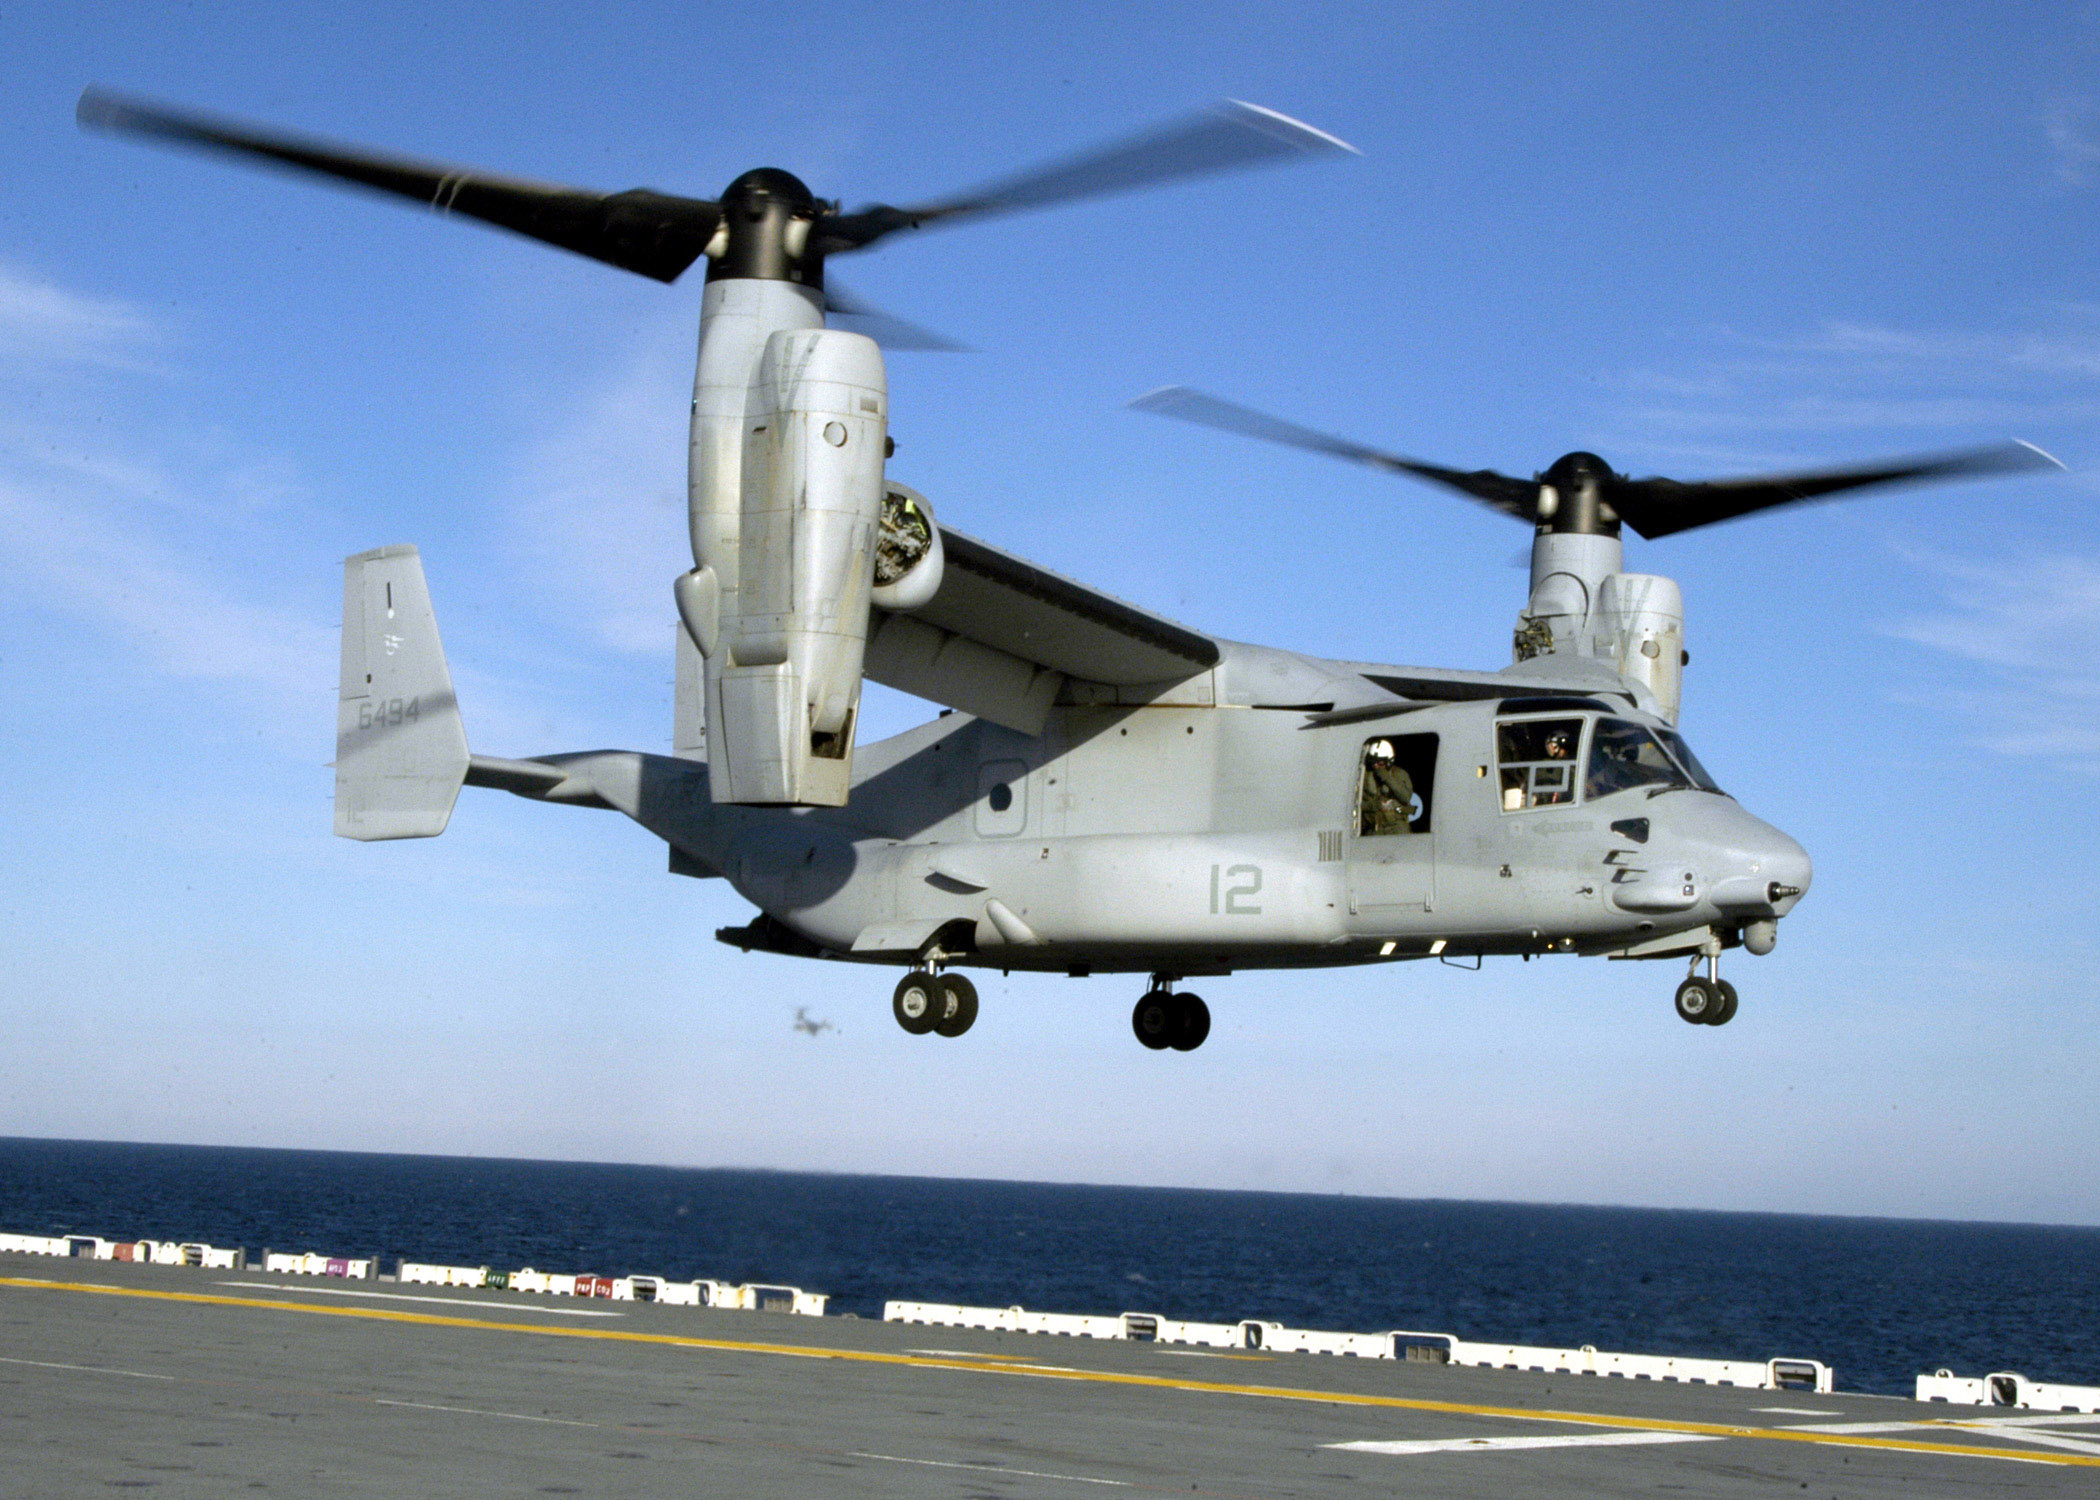 US_Navy_061206-N-0458E-076_A_U.S._Marine_Corps_V-22_Osprey_helicopter_practices_touch_and_go_landings_on_the_flight_deck_of_the_multipurpose_amphibious_assault_ship_USS_Wasp_%28LHD_1%29.jpg